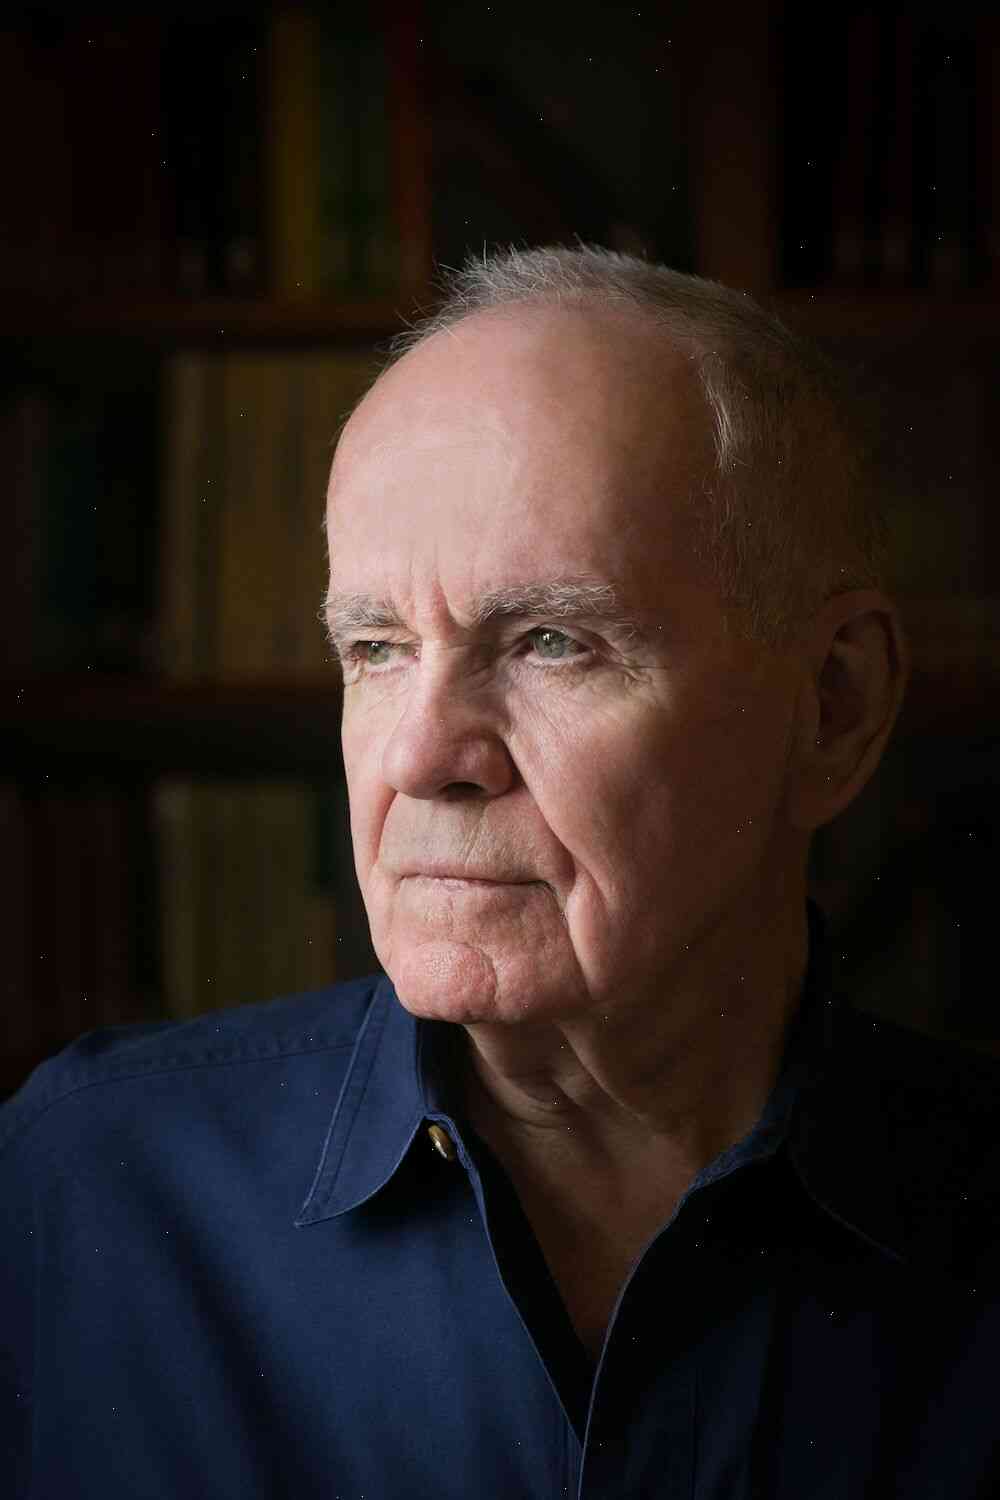 Cormac McCarthy: The Road and The Oranges of Hieronymus Bosch